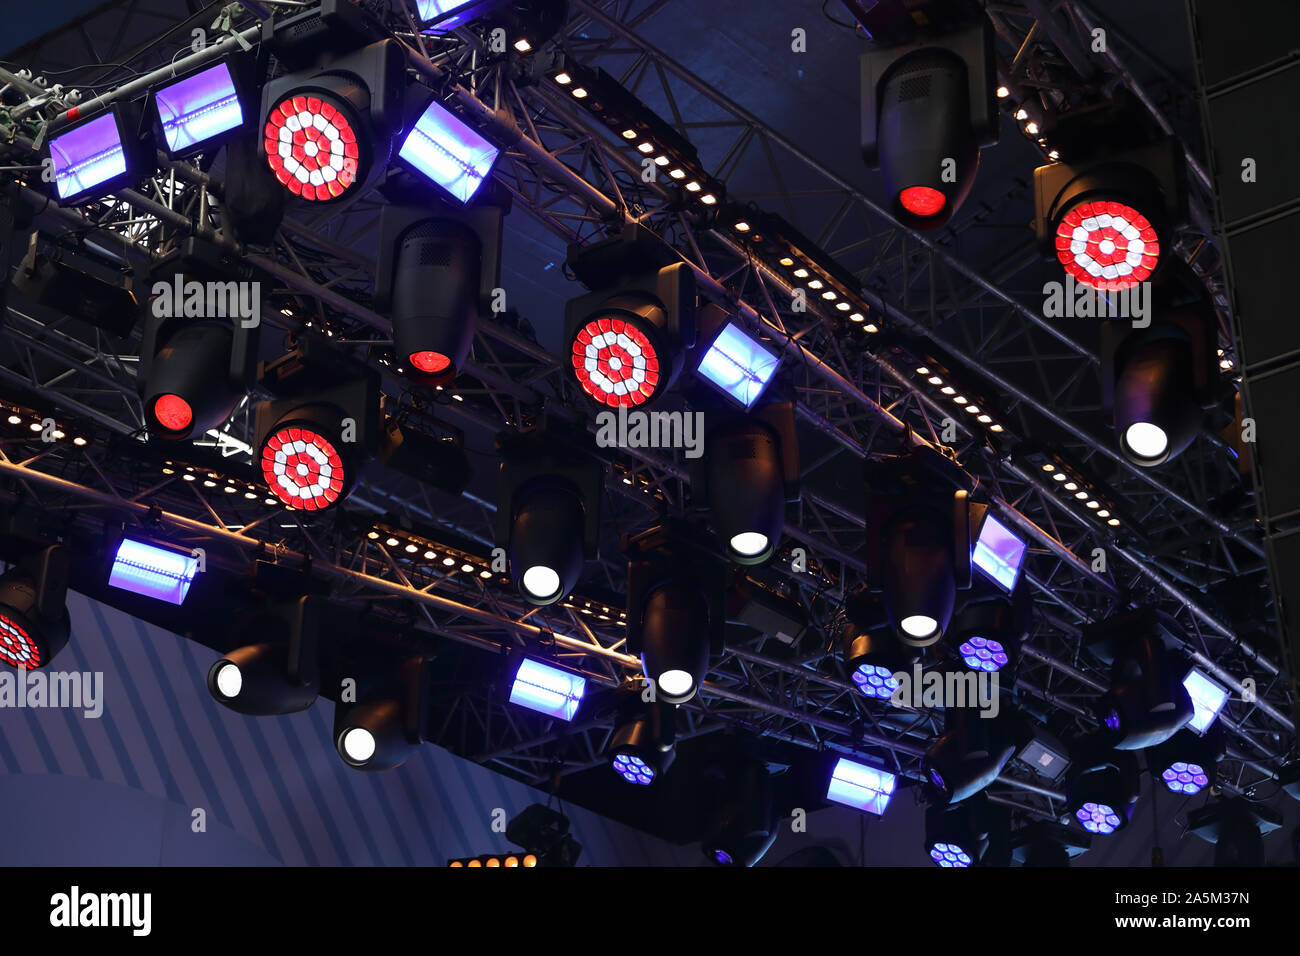 Moving heads and another stage light fixtures hanging on truss. Stock Photo